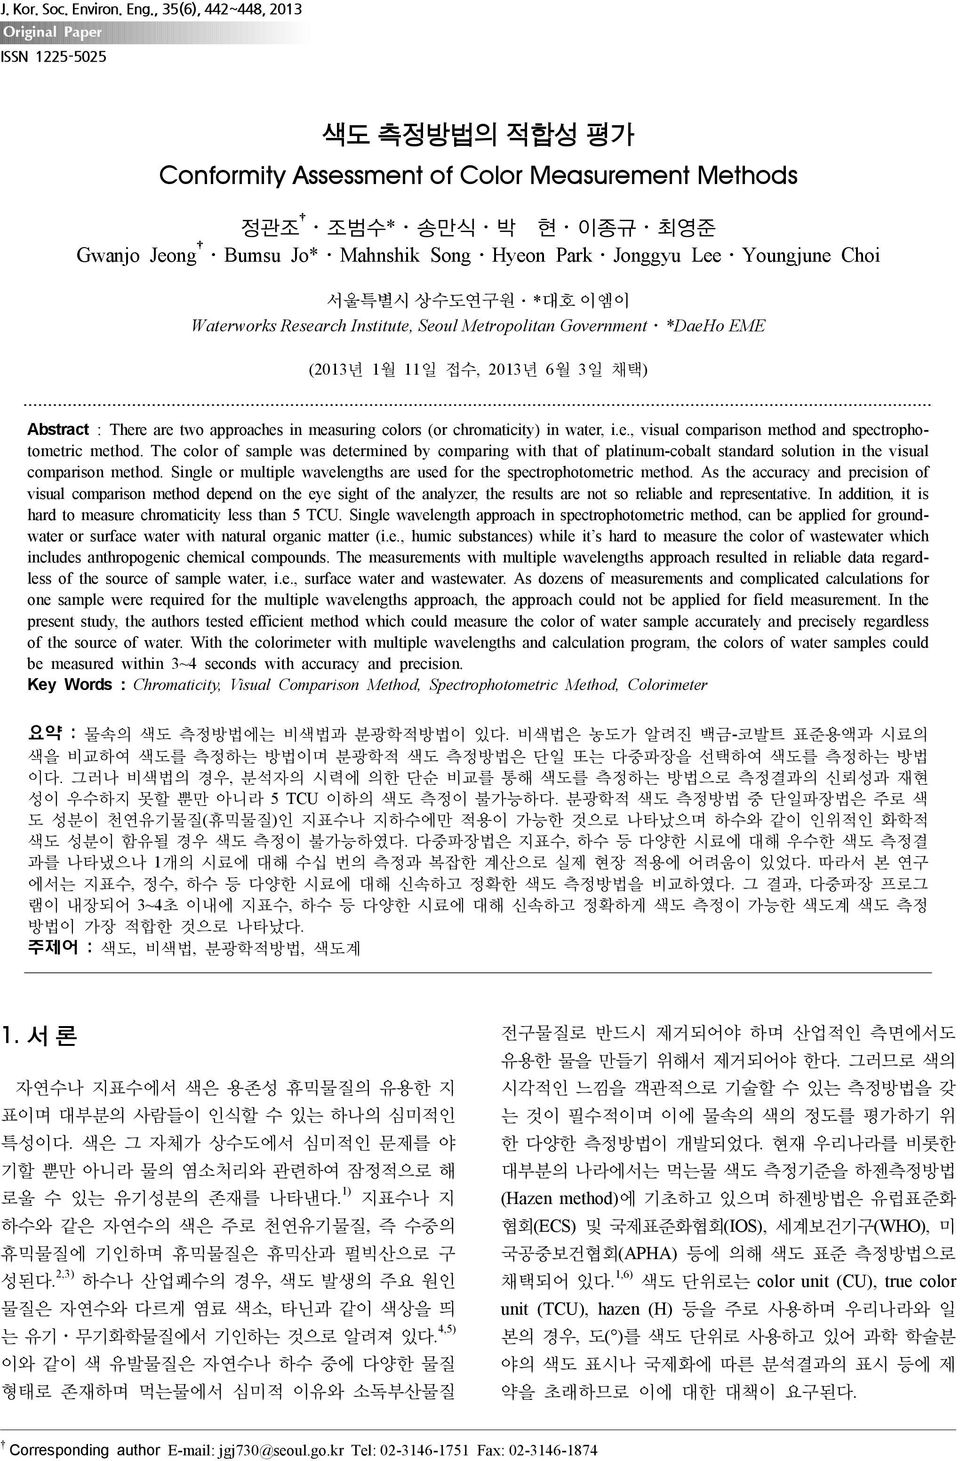 Choi 서울특별시 상수도연구원 *대호 이엠이 Waterworks Research Institute, Seoul Metropolitan Government *DaeHo EME (2013년 1월 11일 접수, 2013년 6월 3일 채택) Abstract : There are two approaches in measuring colors (or